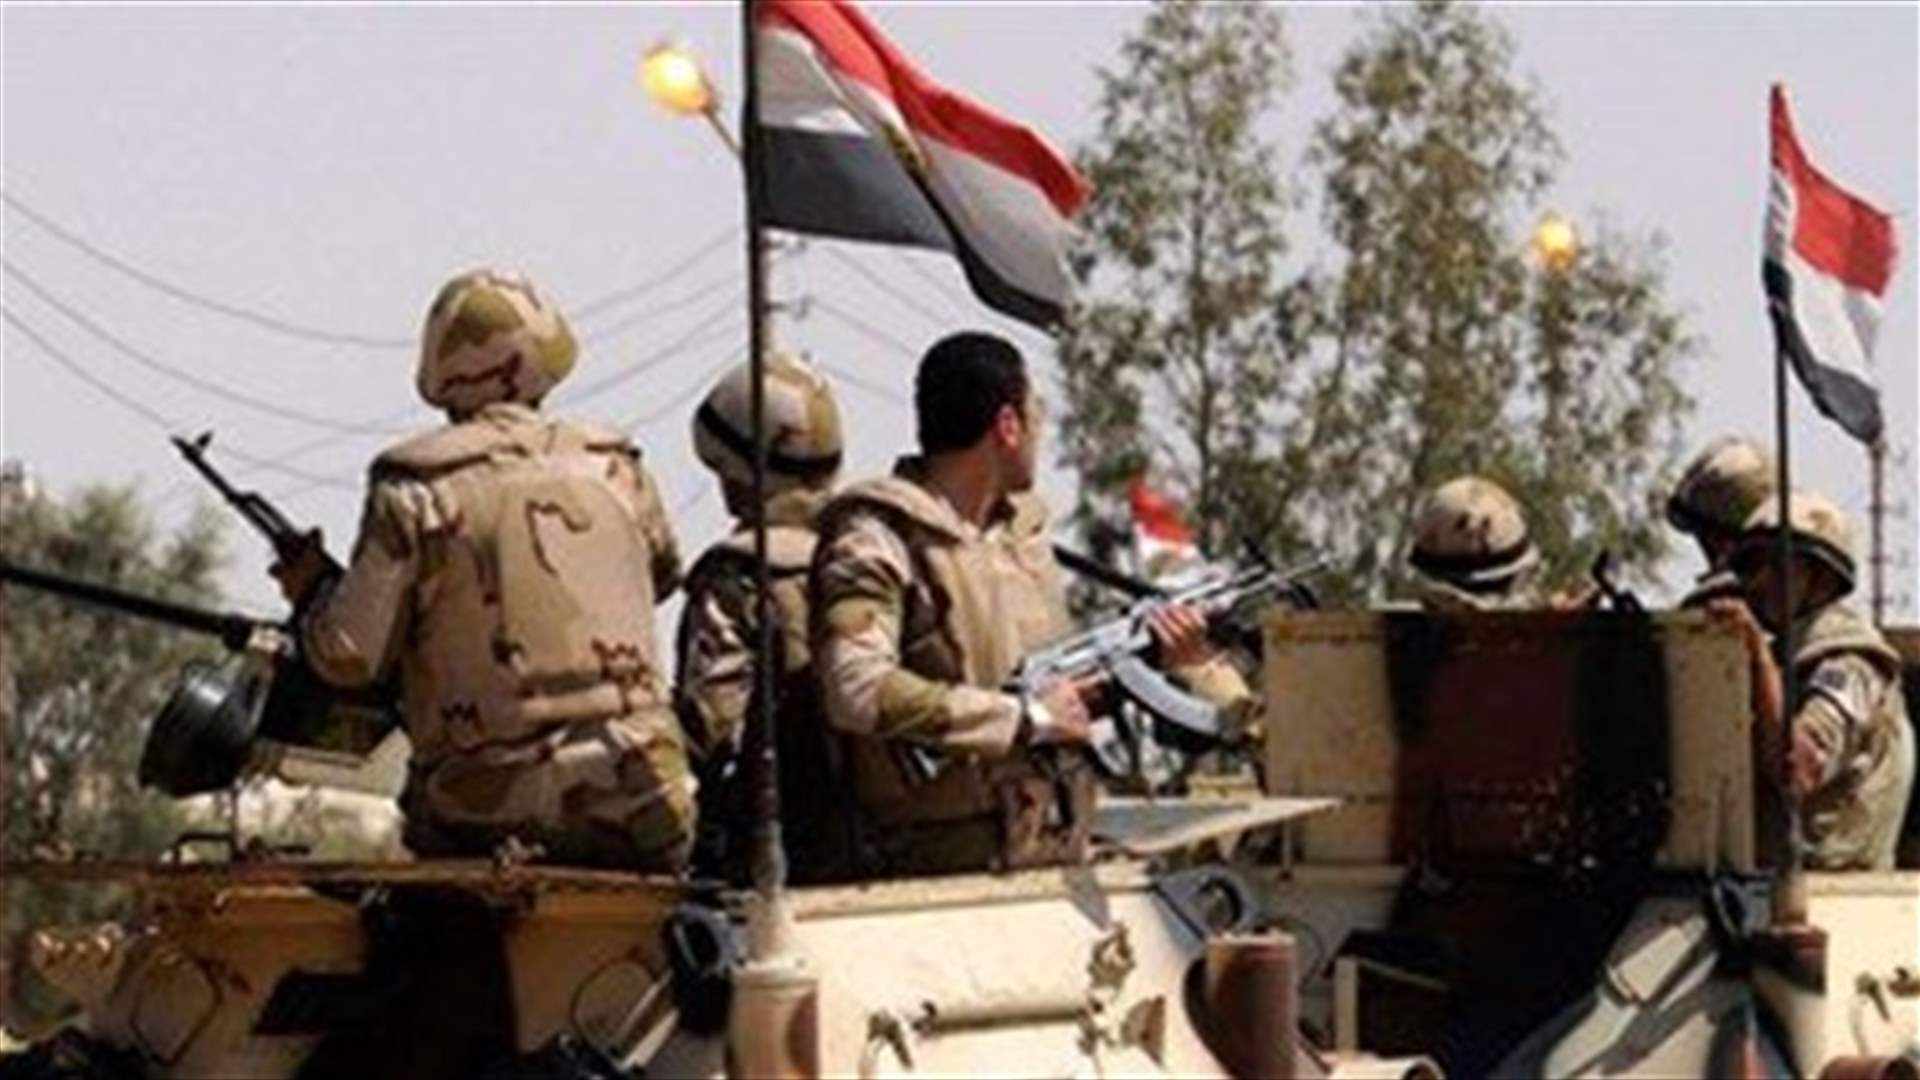 Seven militants killed, 15 troops killed or wounded in North Sinai - Egyptian military